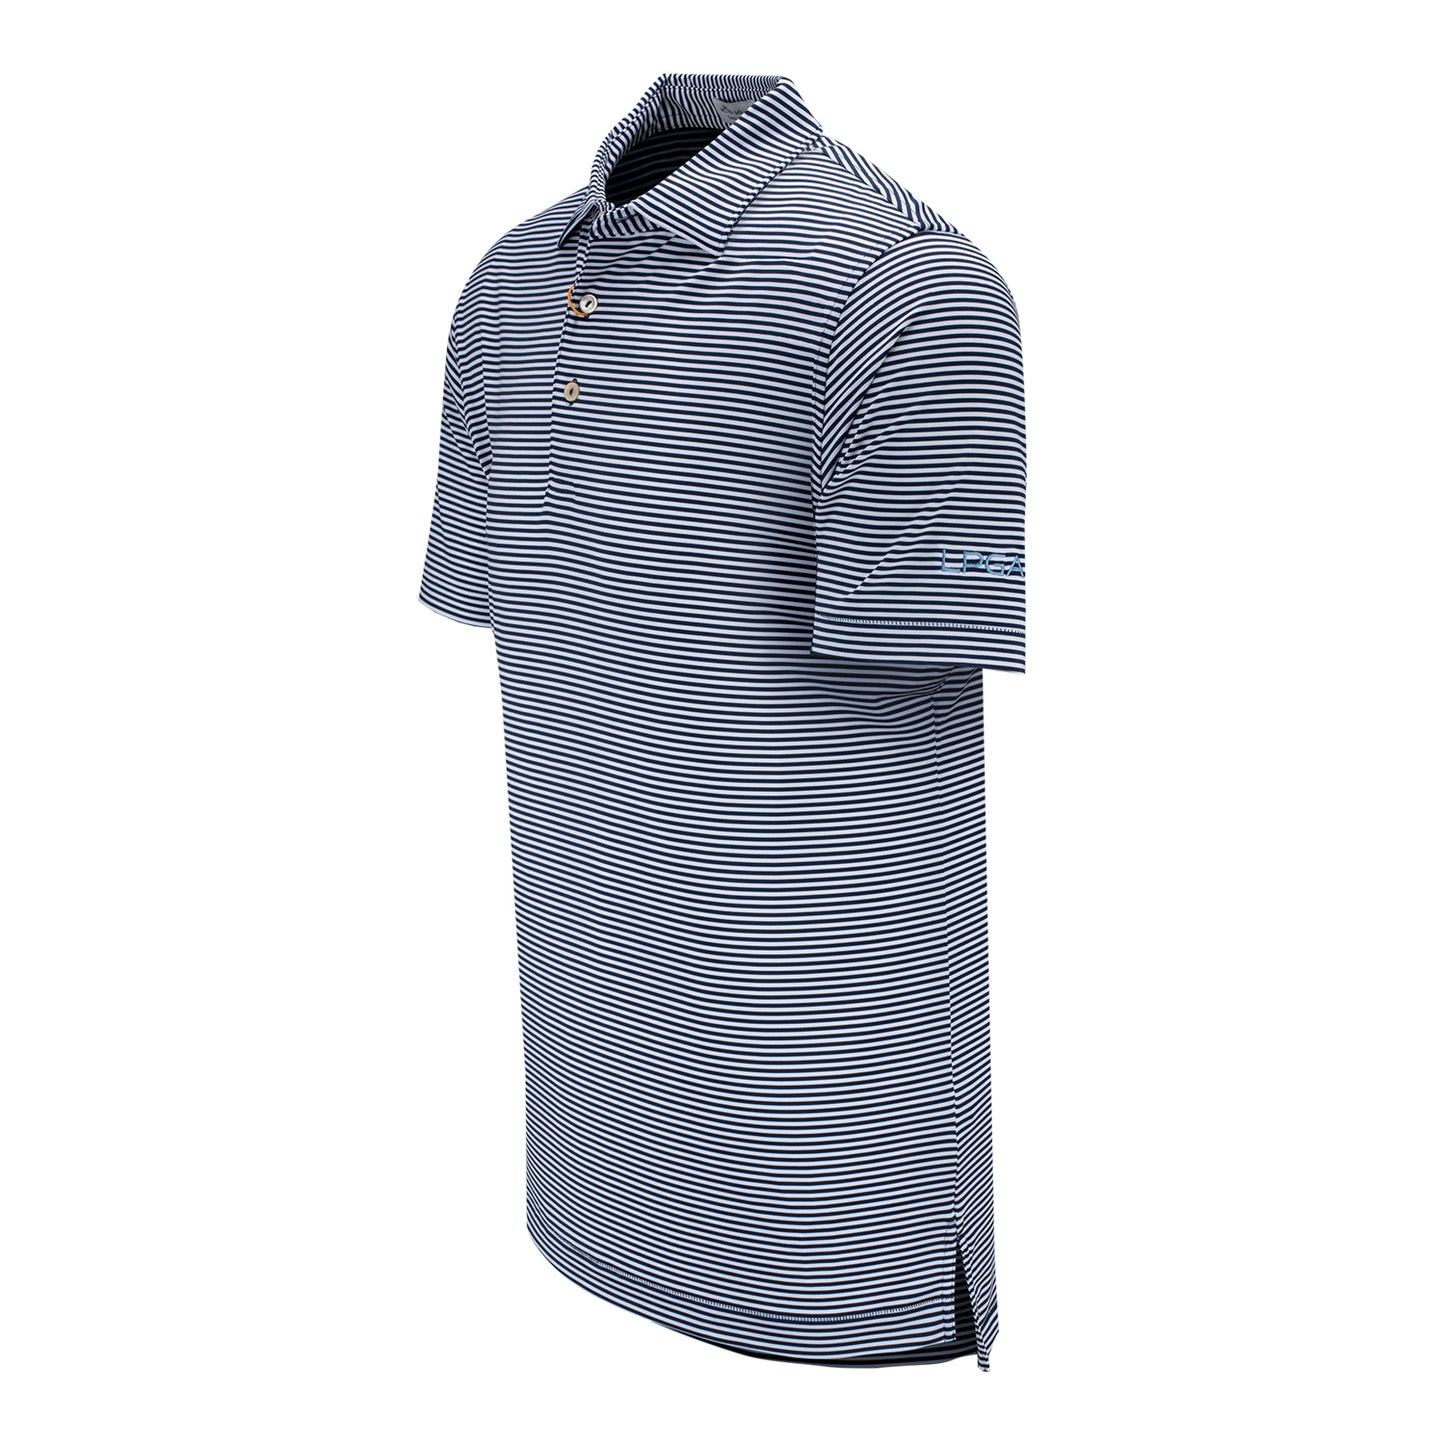 Peter Millar 2023 LPGA Men's Hales Jersey Polo - Angled Left Side View